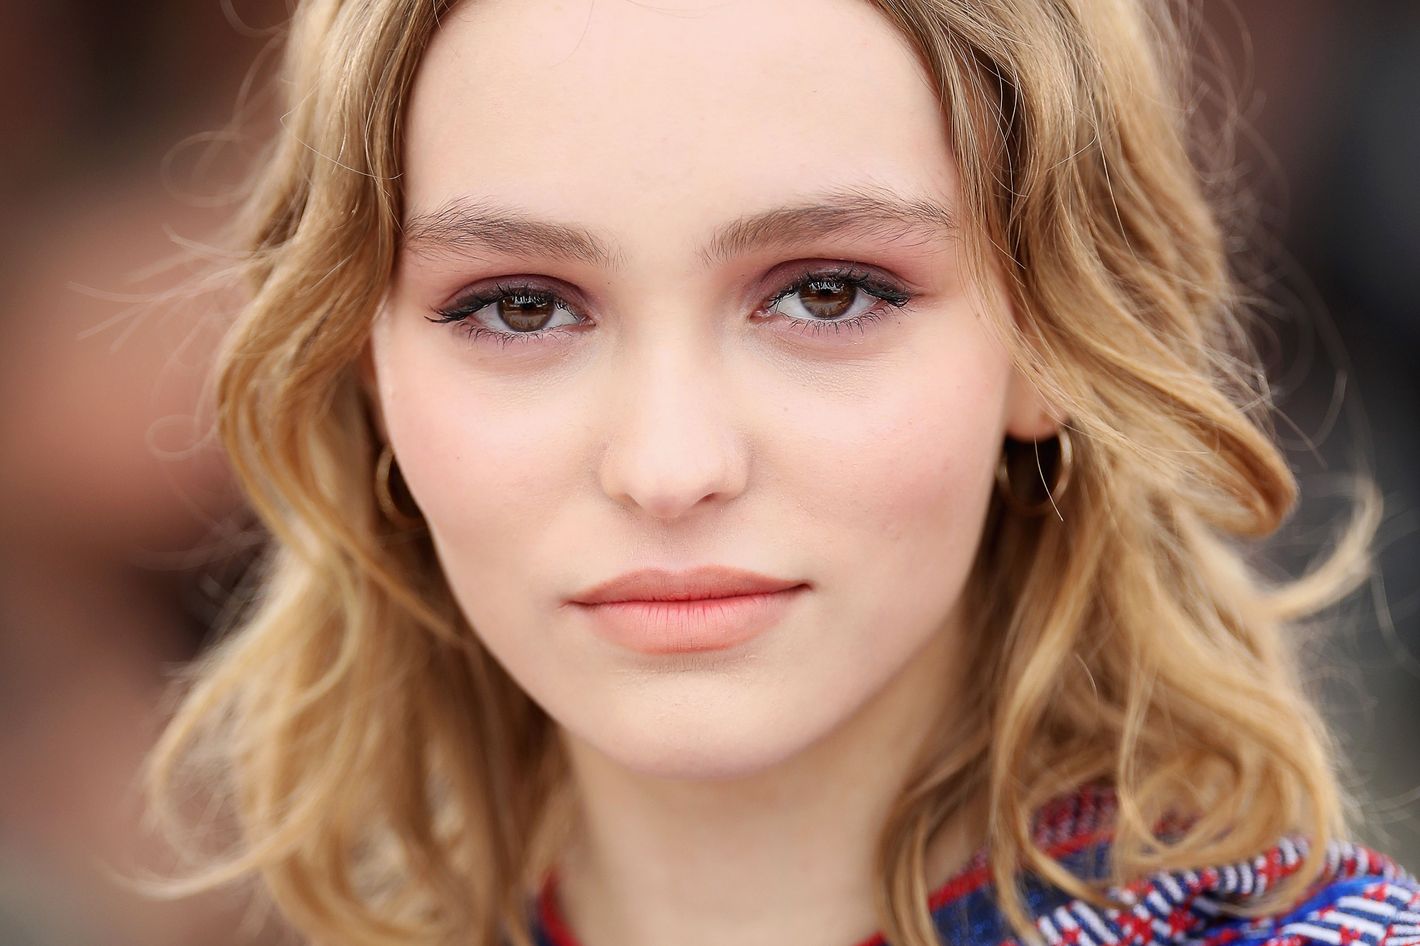 Lily-Rose Depp revealed as official face for Chanel No 5 L'Eau